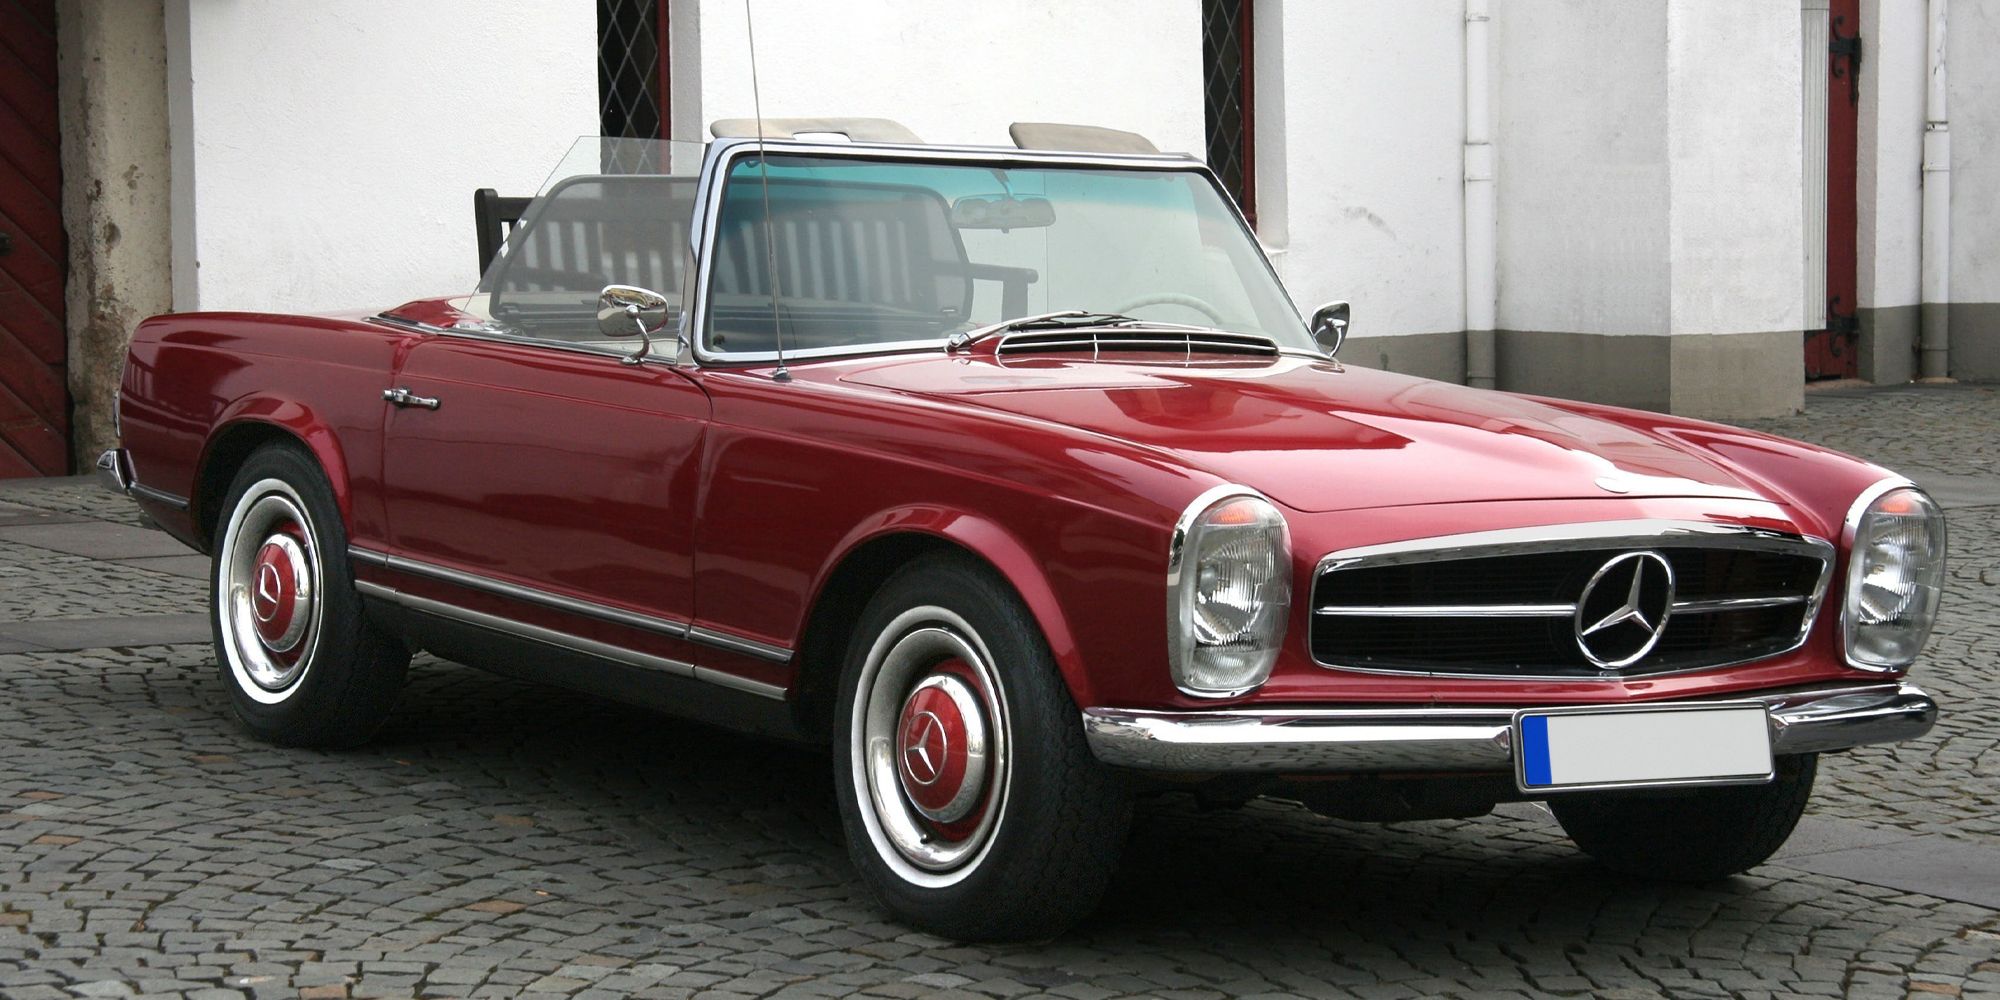 The front of the 280SL Pagoda